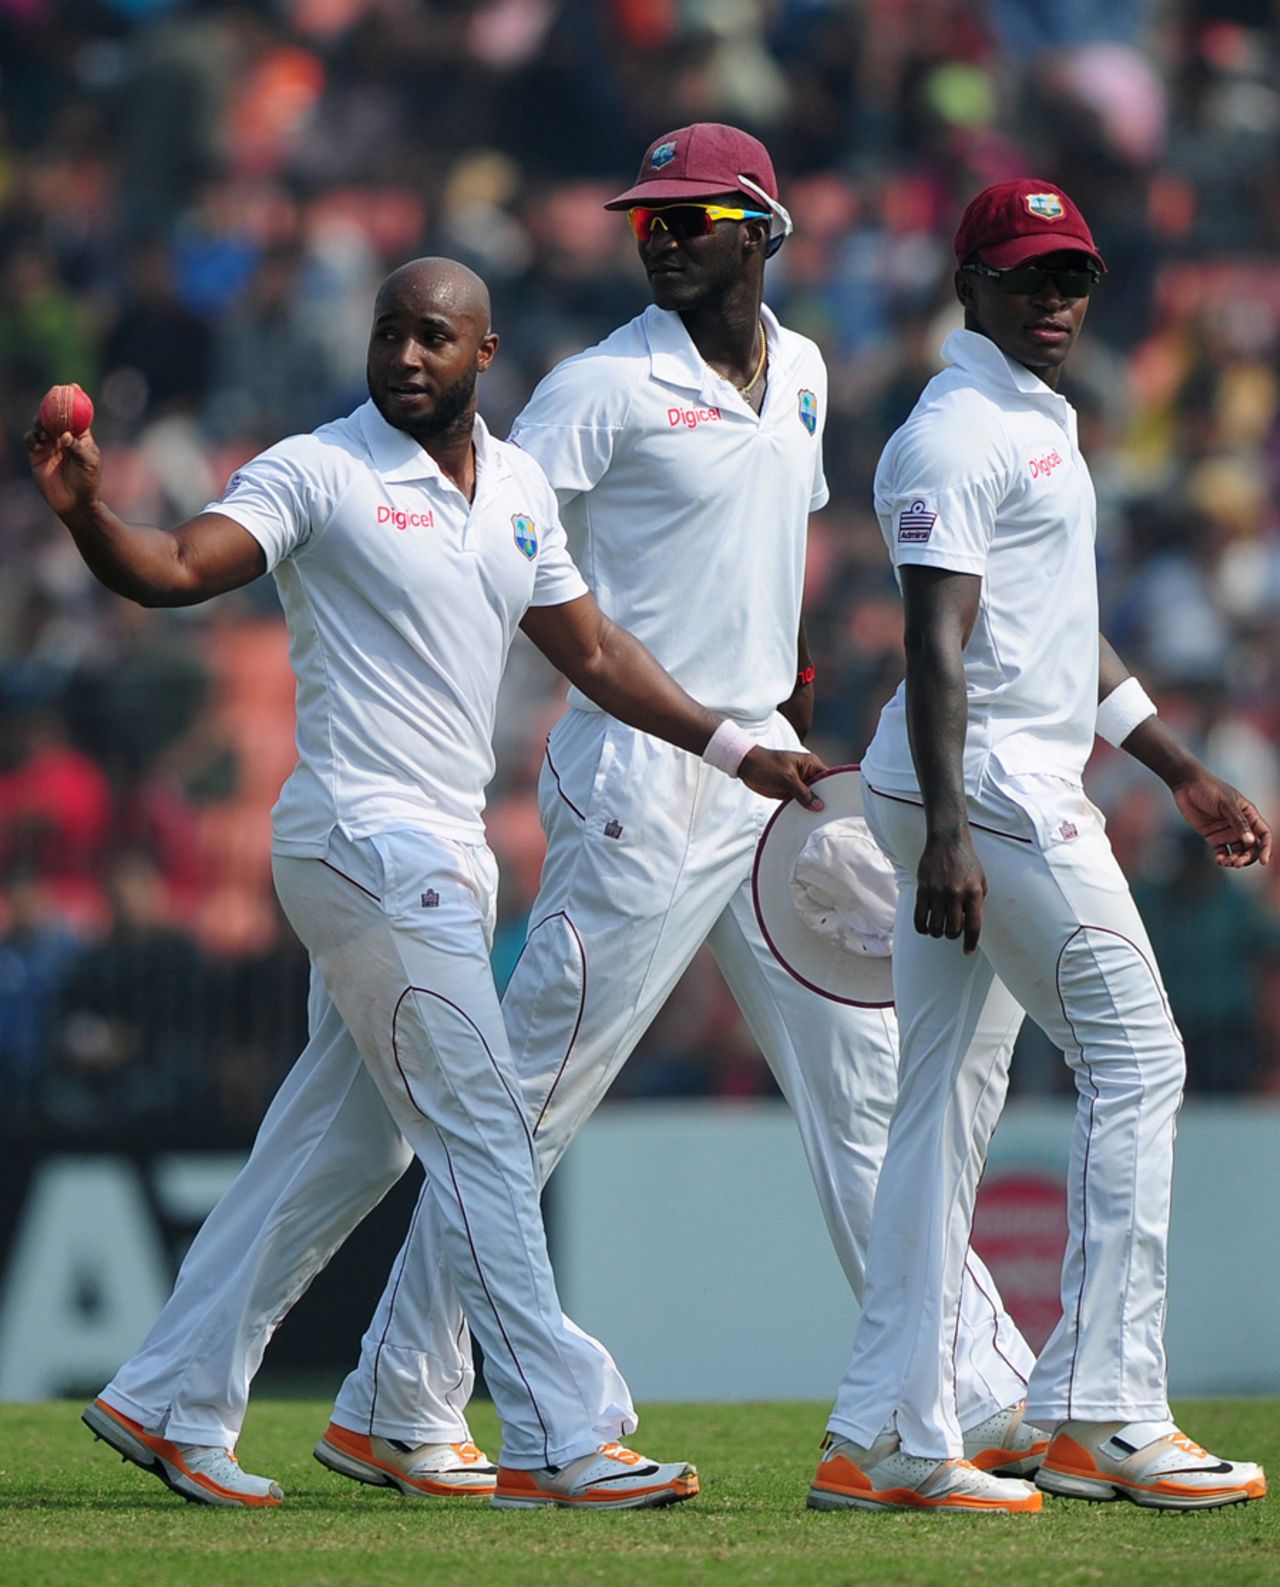 Tino Best picked up 6 for 40, his best Test figures, Bangladesh v West Indies, 2nd Test, Khulna, 5th day, November 25, 2012